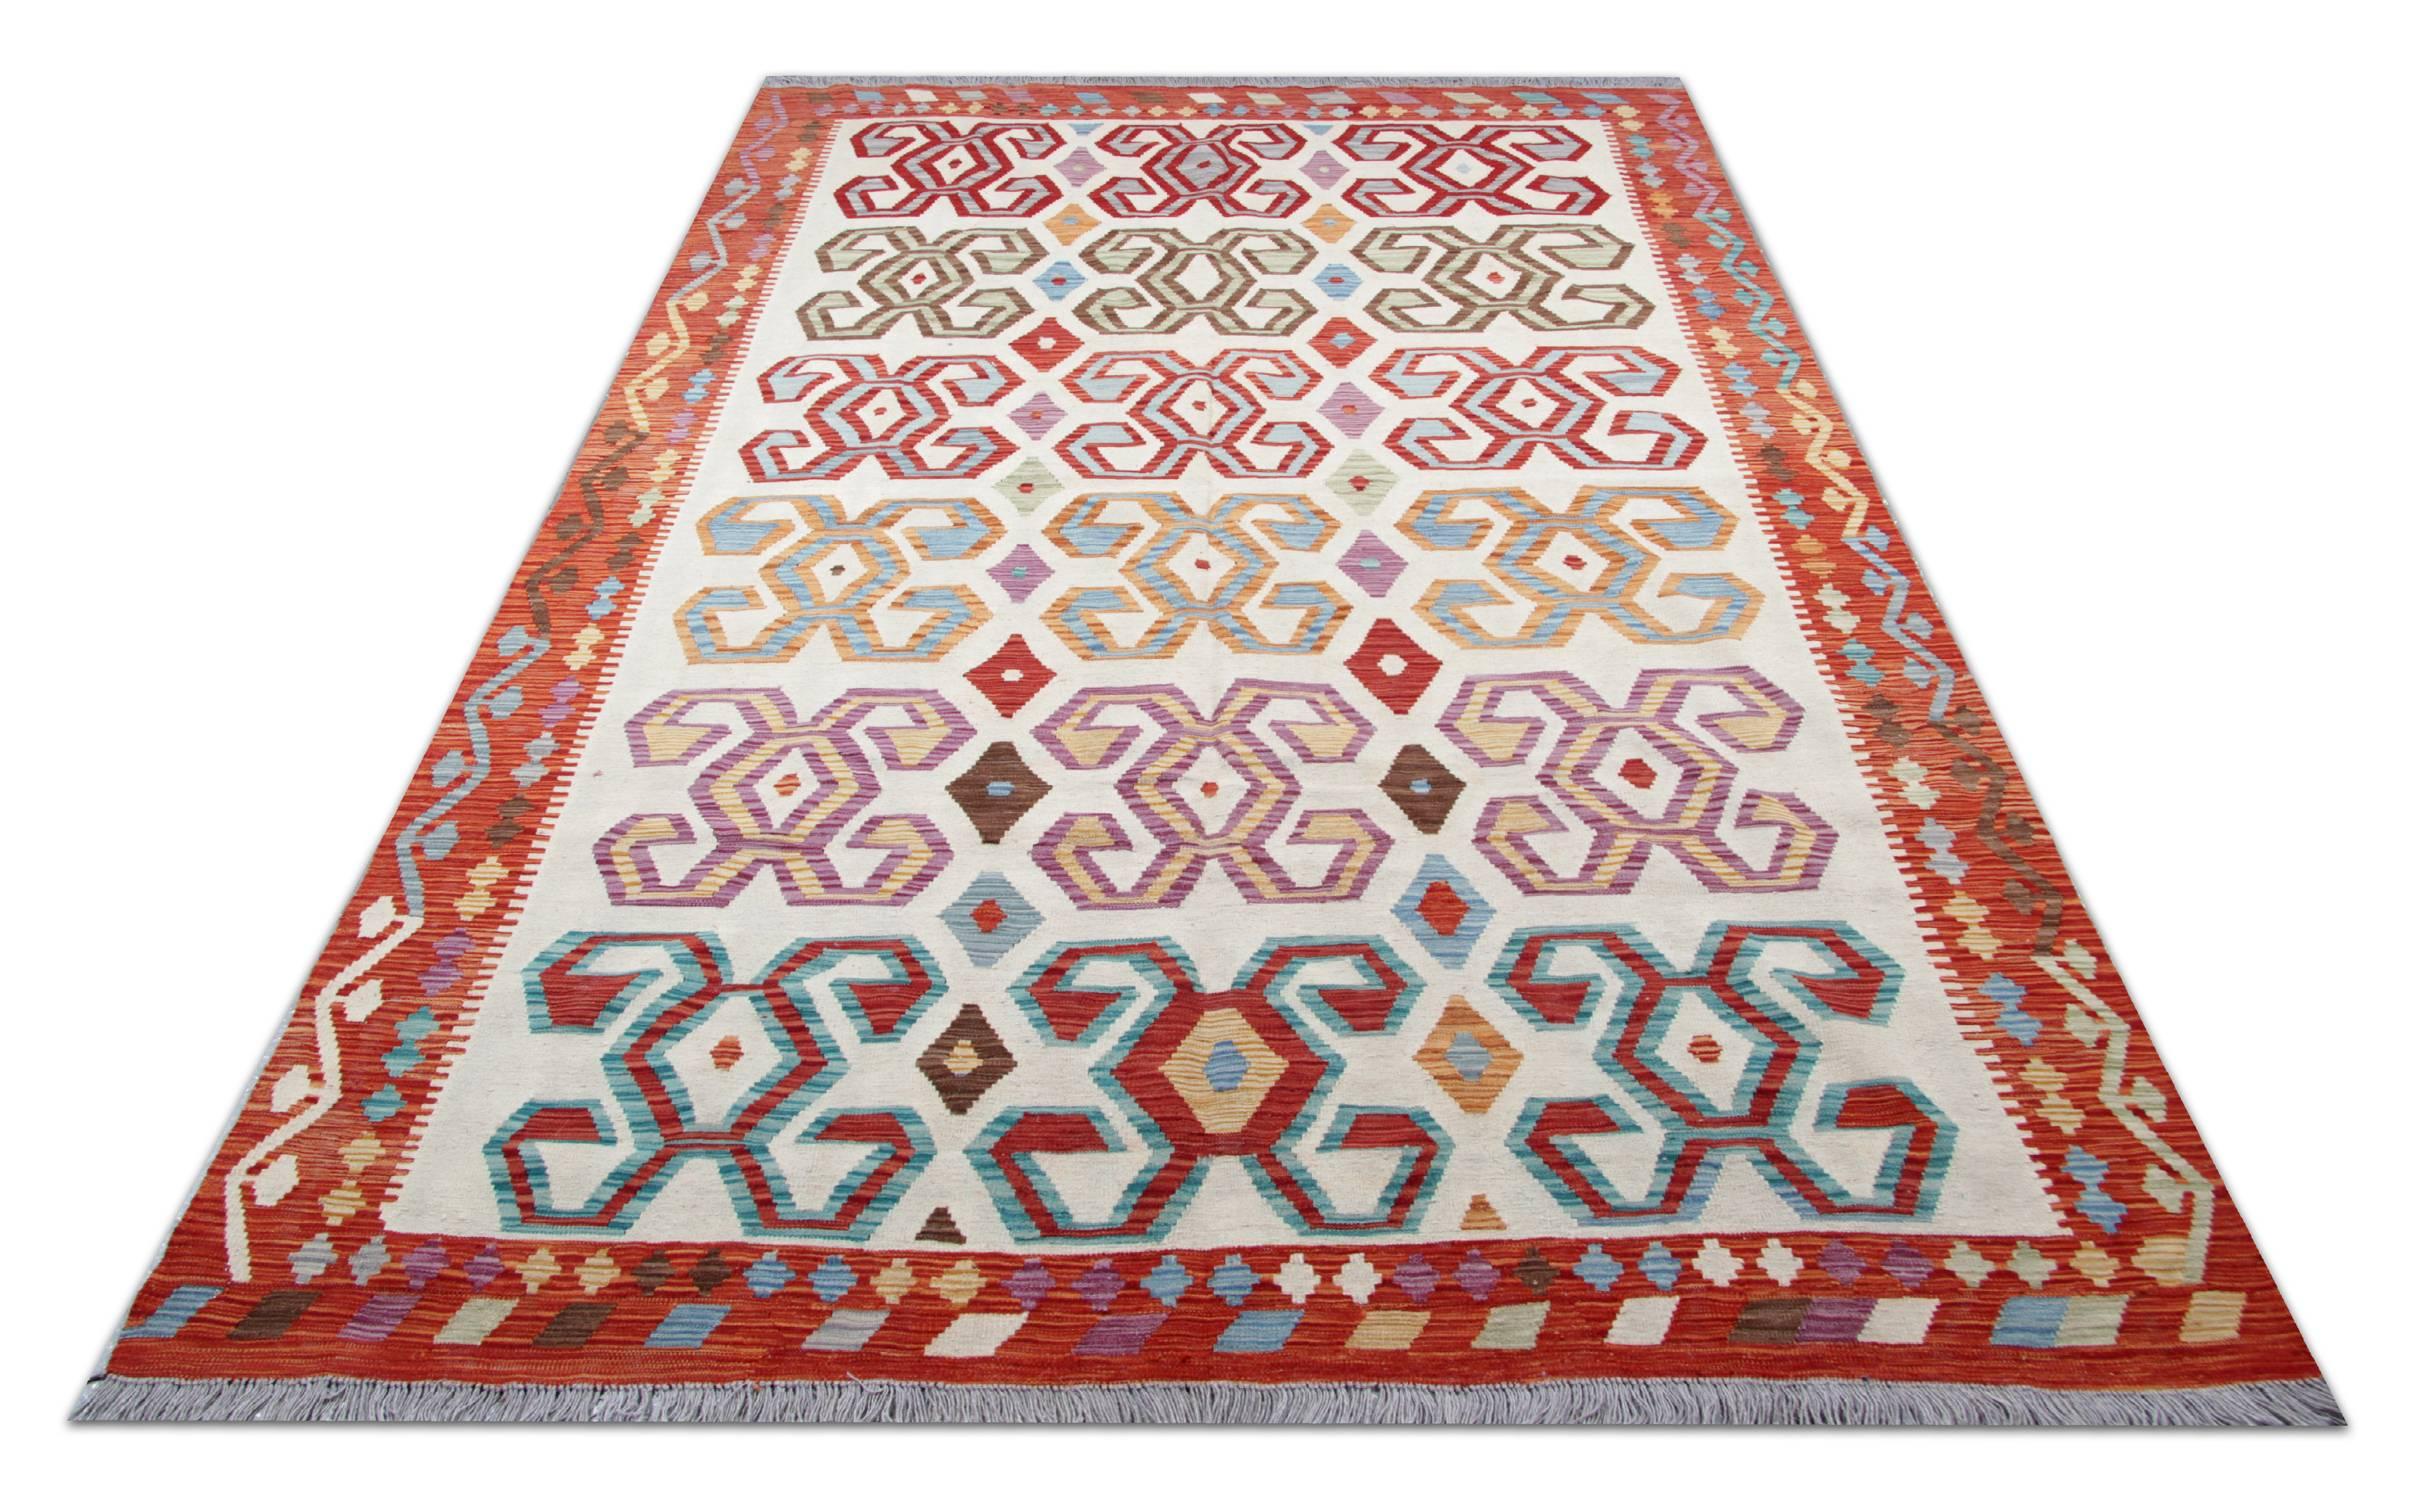 These wool rugs are handwoven by the very skilled weaver in Afghanistan by Uzbek and Turkmen tribes. These natural rugs reflect the best weaving traditions and are also unique colourful rugs. This Oriental rug is a flat weave rug and woven in